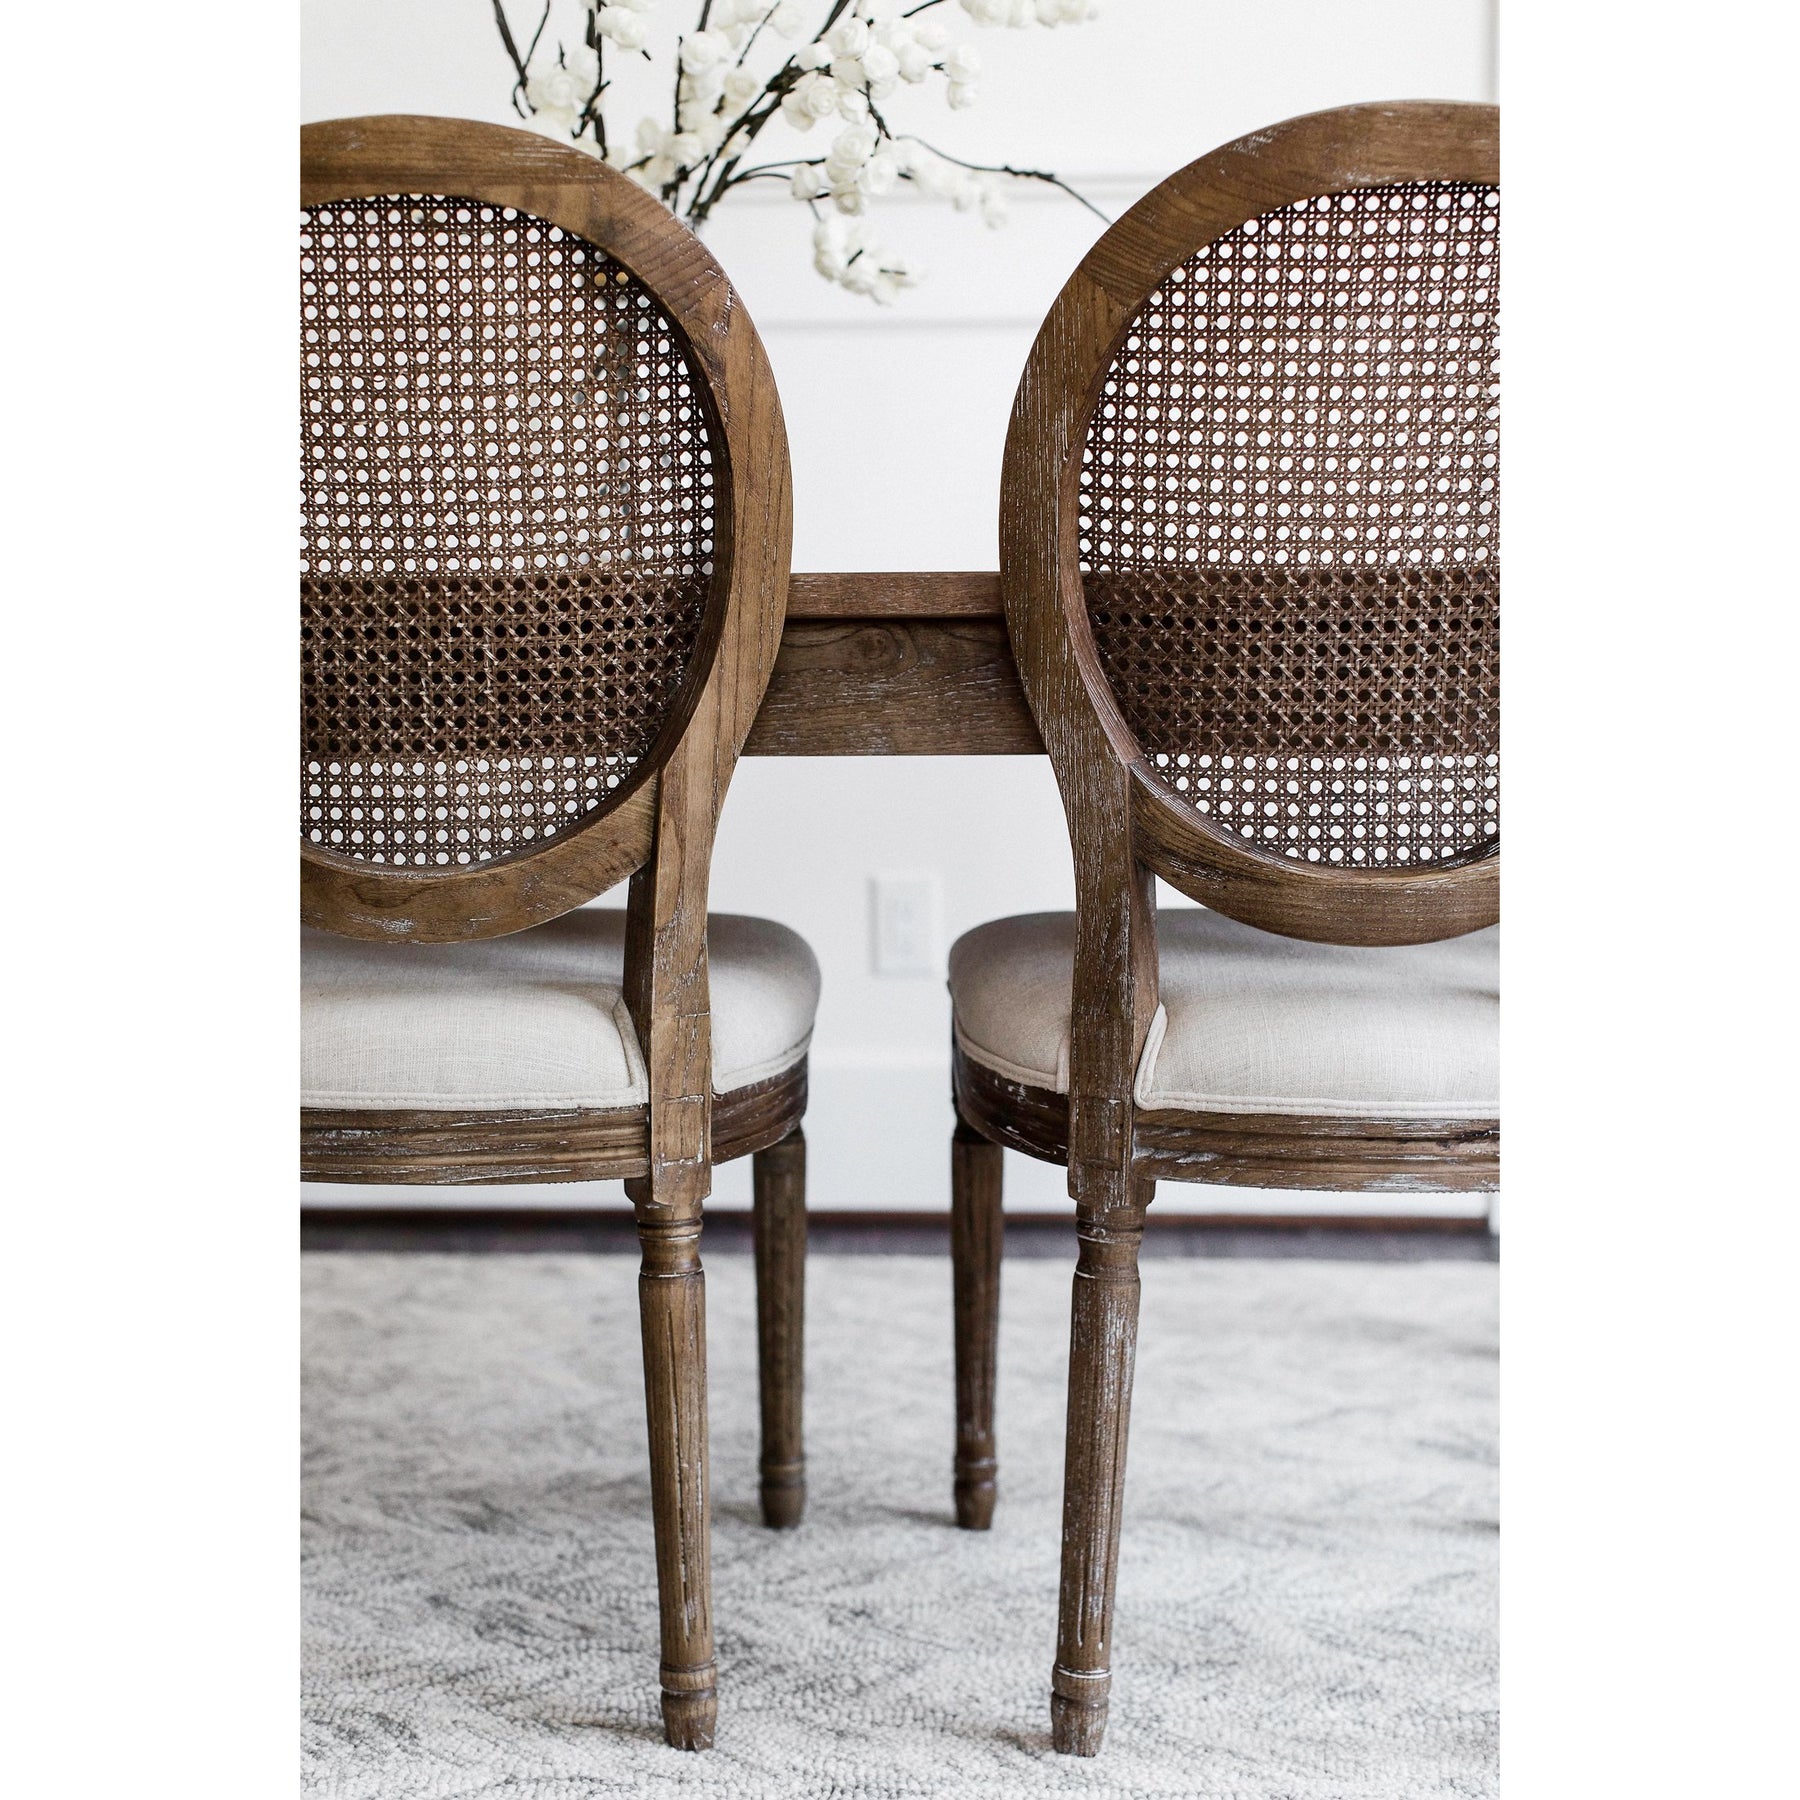 Edloe Finch Charlie French Country Dining Chairs, Set of 2